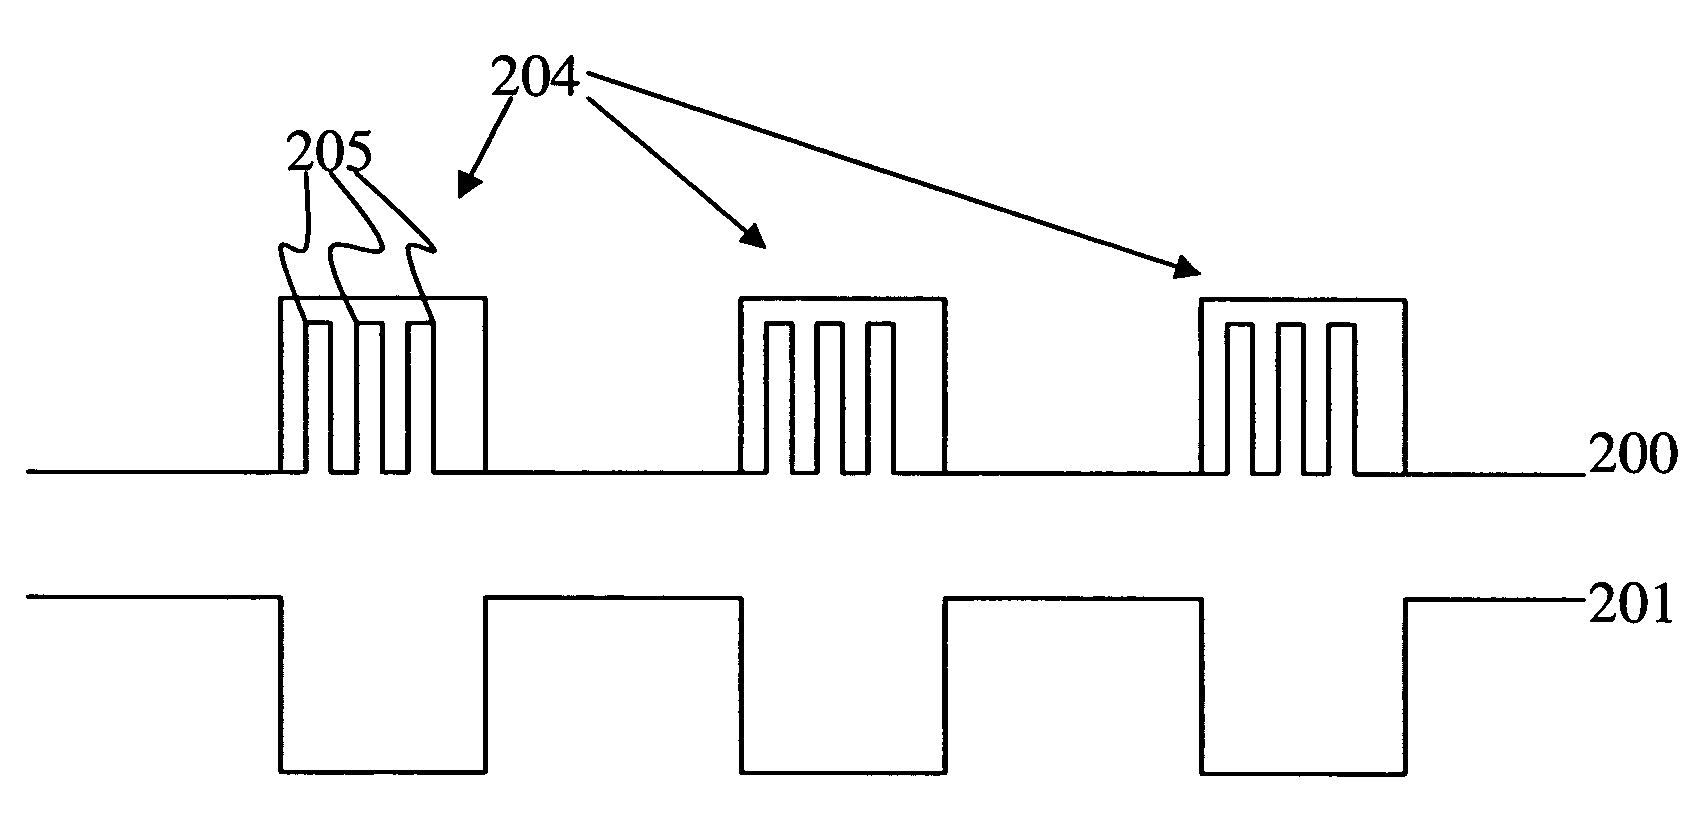 Exposure time selection in a transmission apparatus with a camera